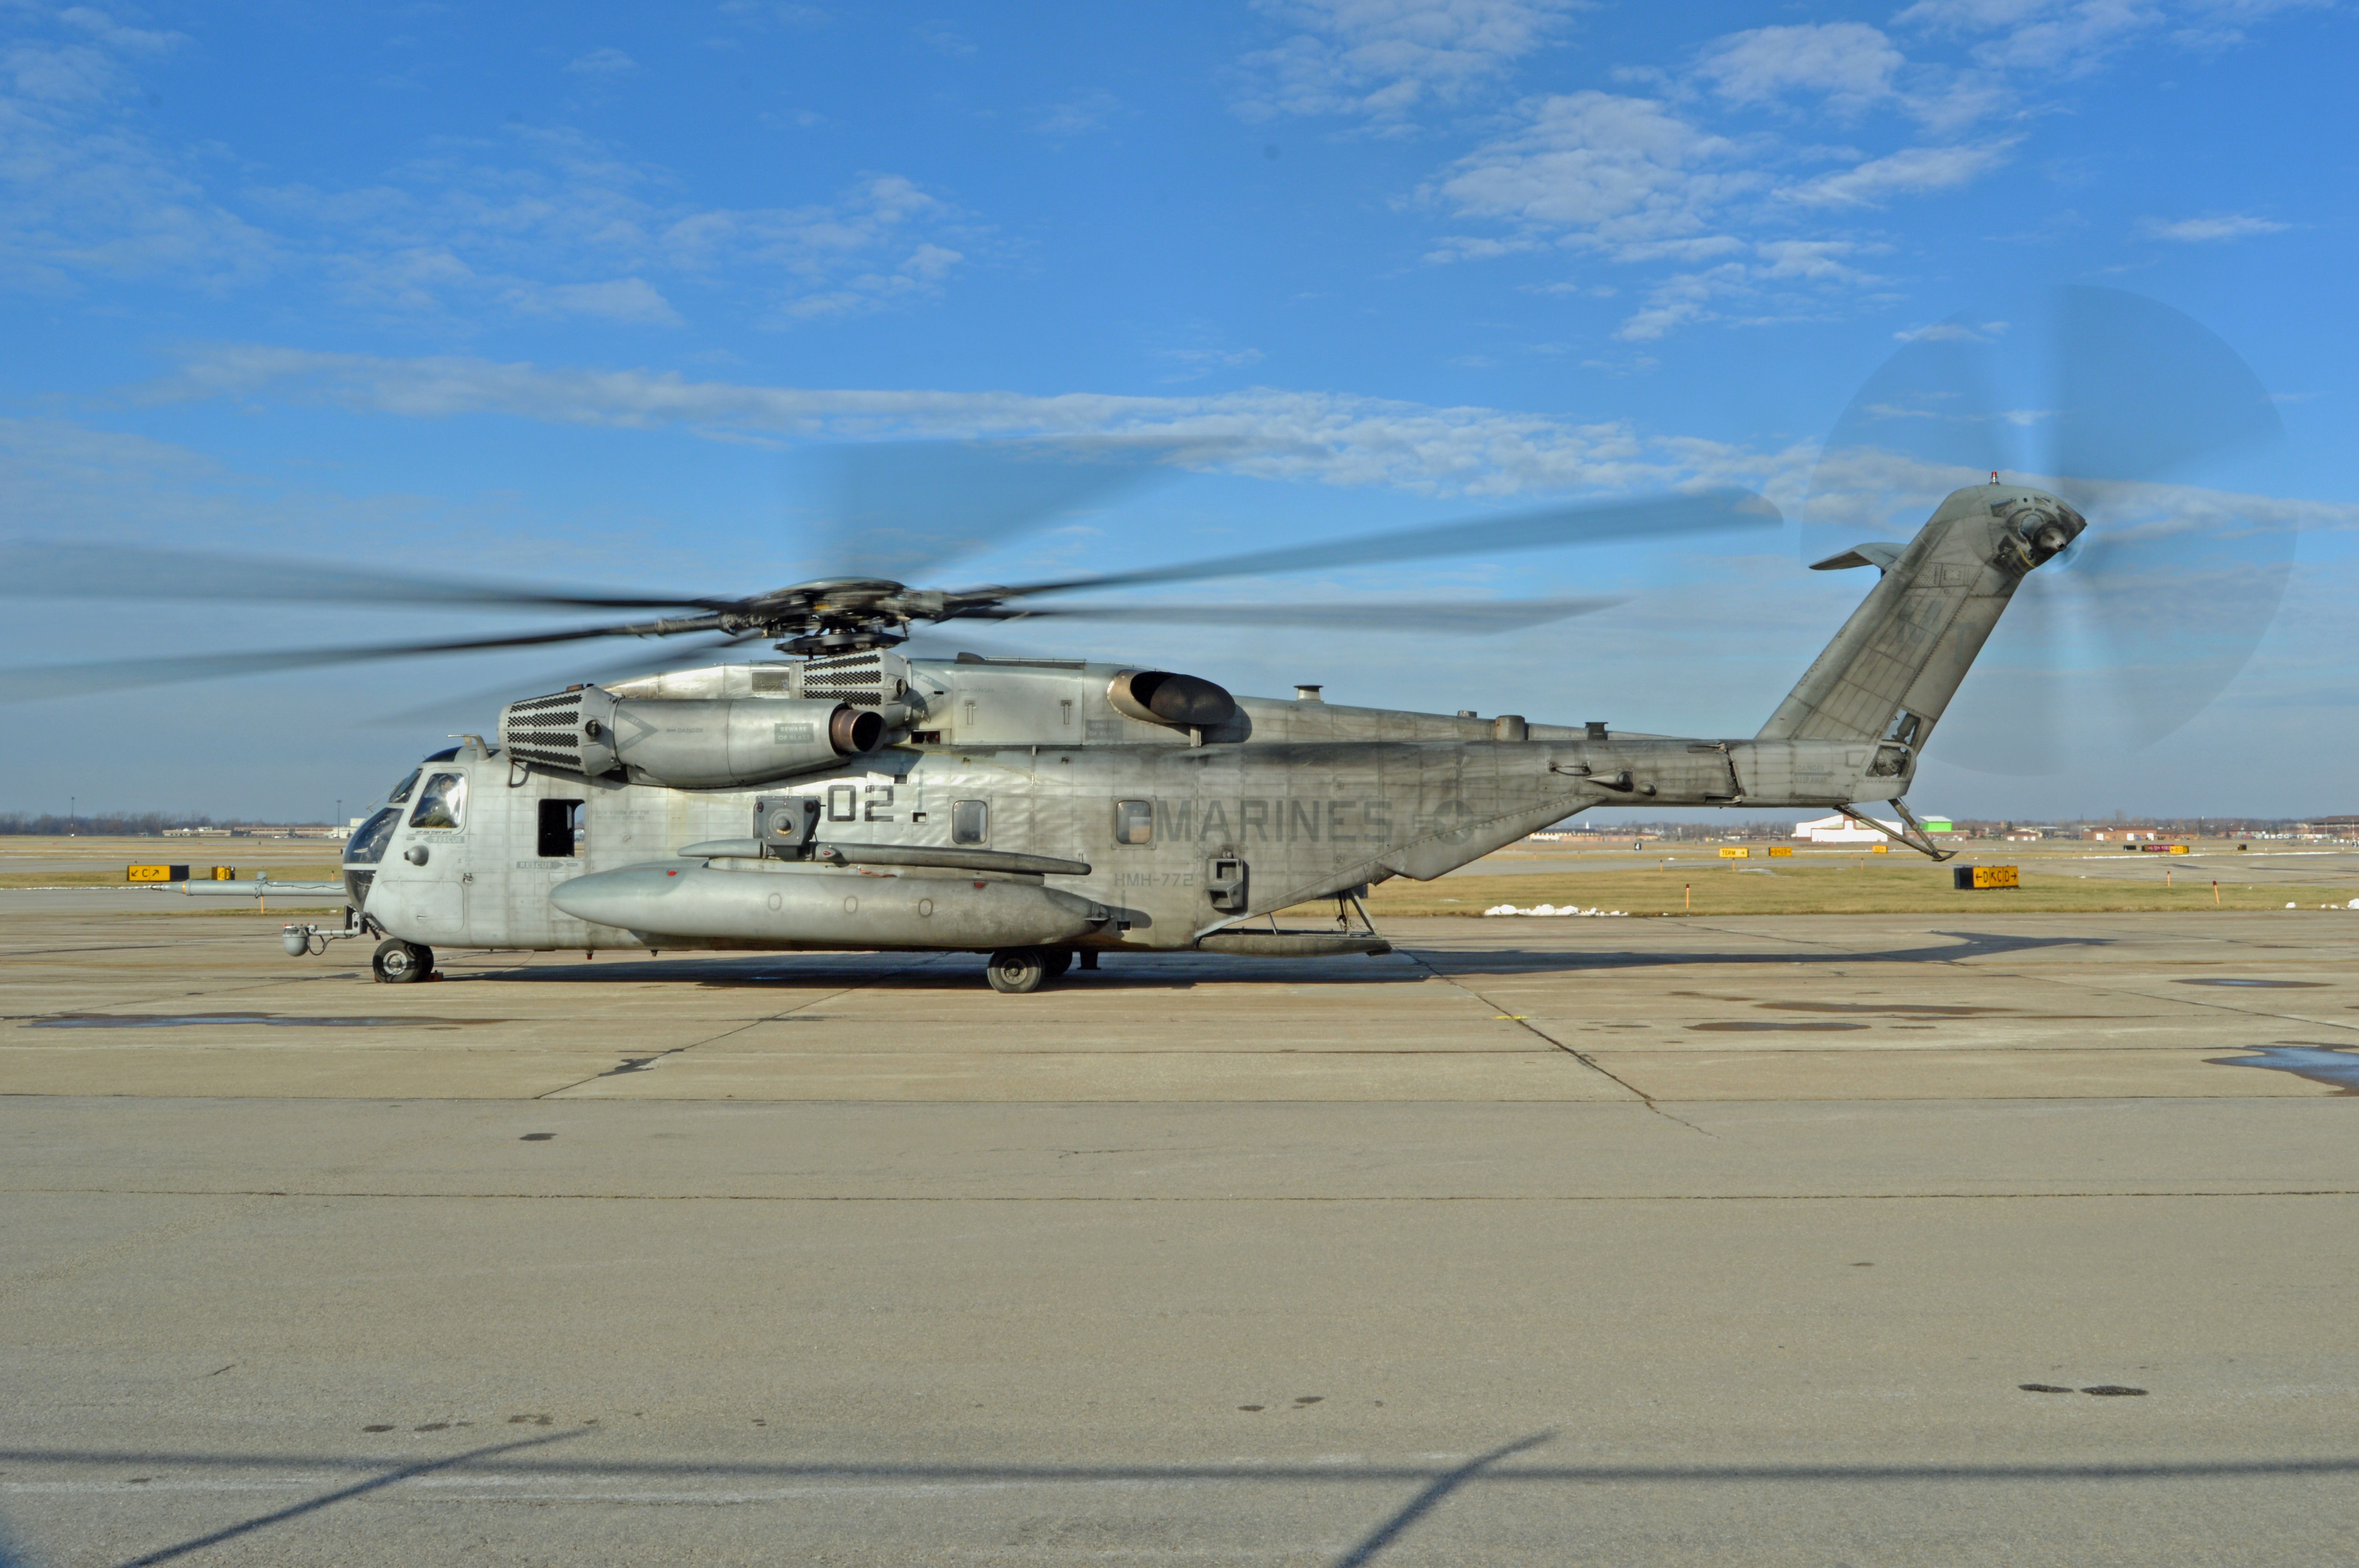 — — - A Marine Corps CH-53 Super Stallion from McGuire AFB at Niagara Falls International Airport